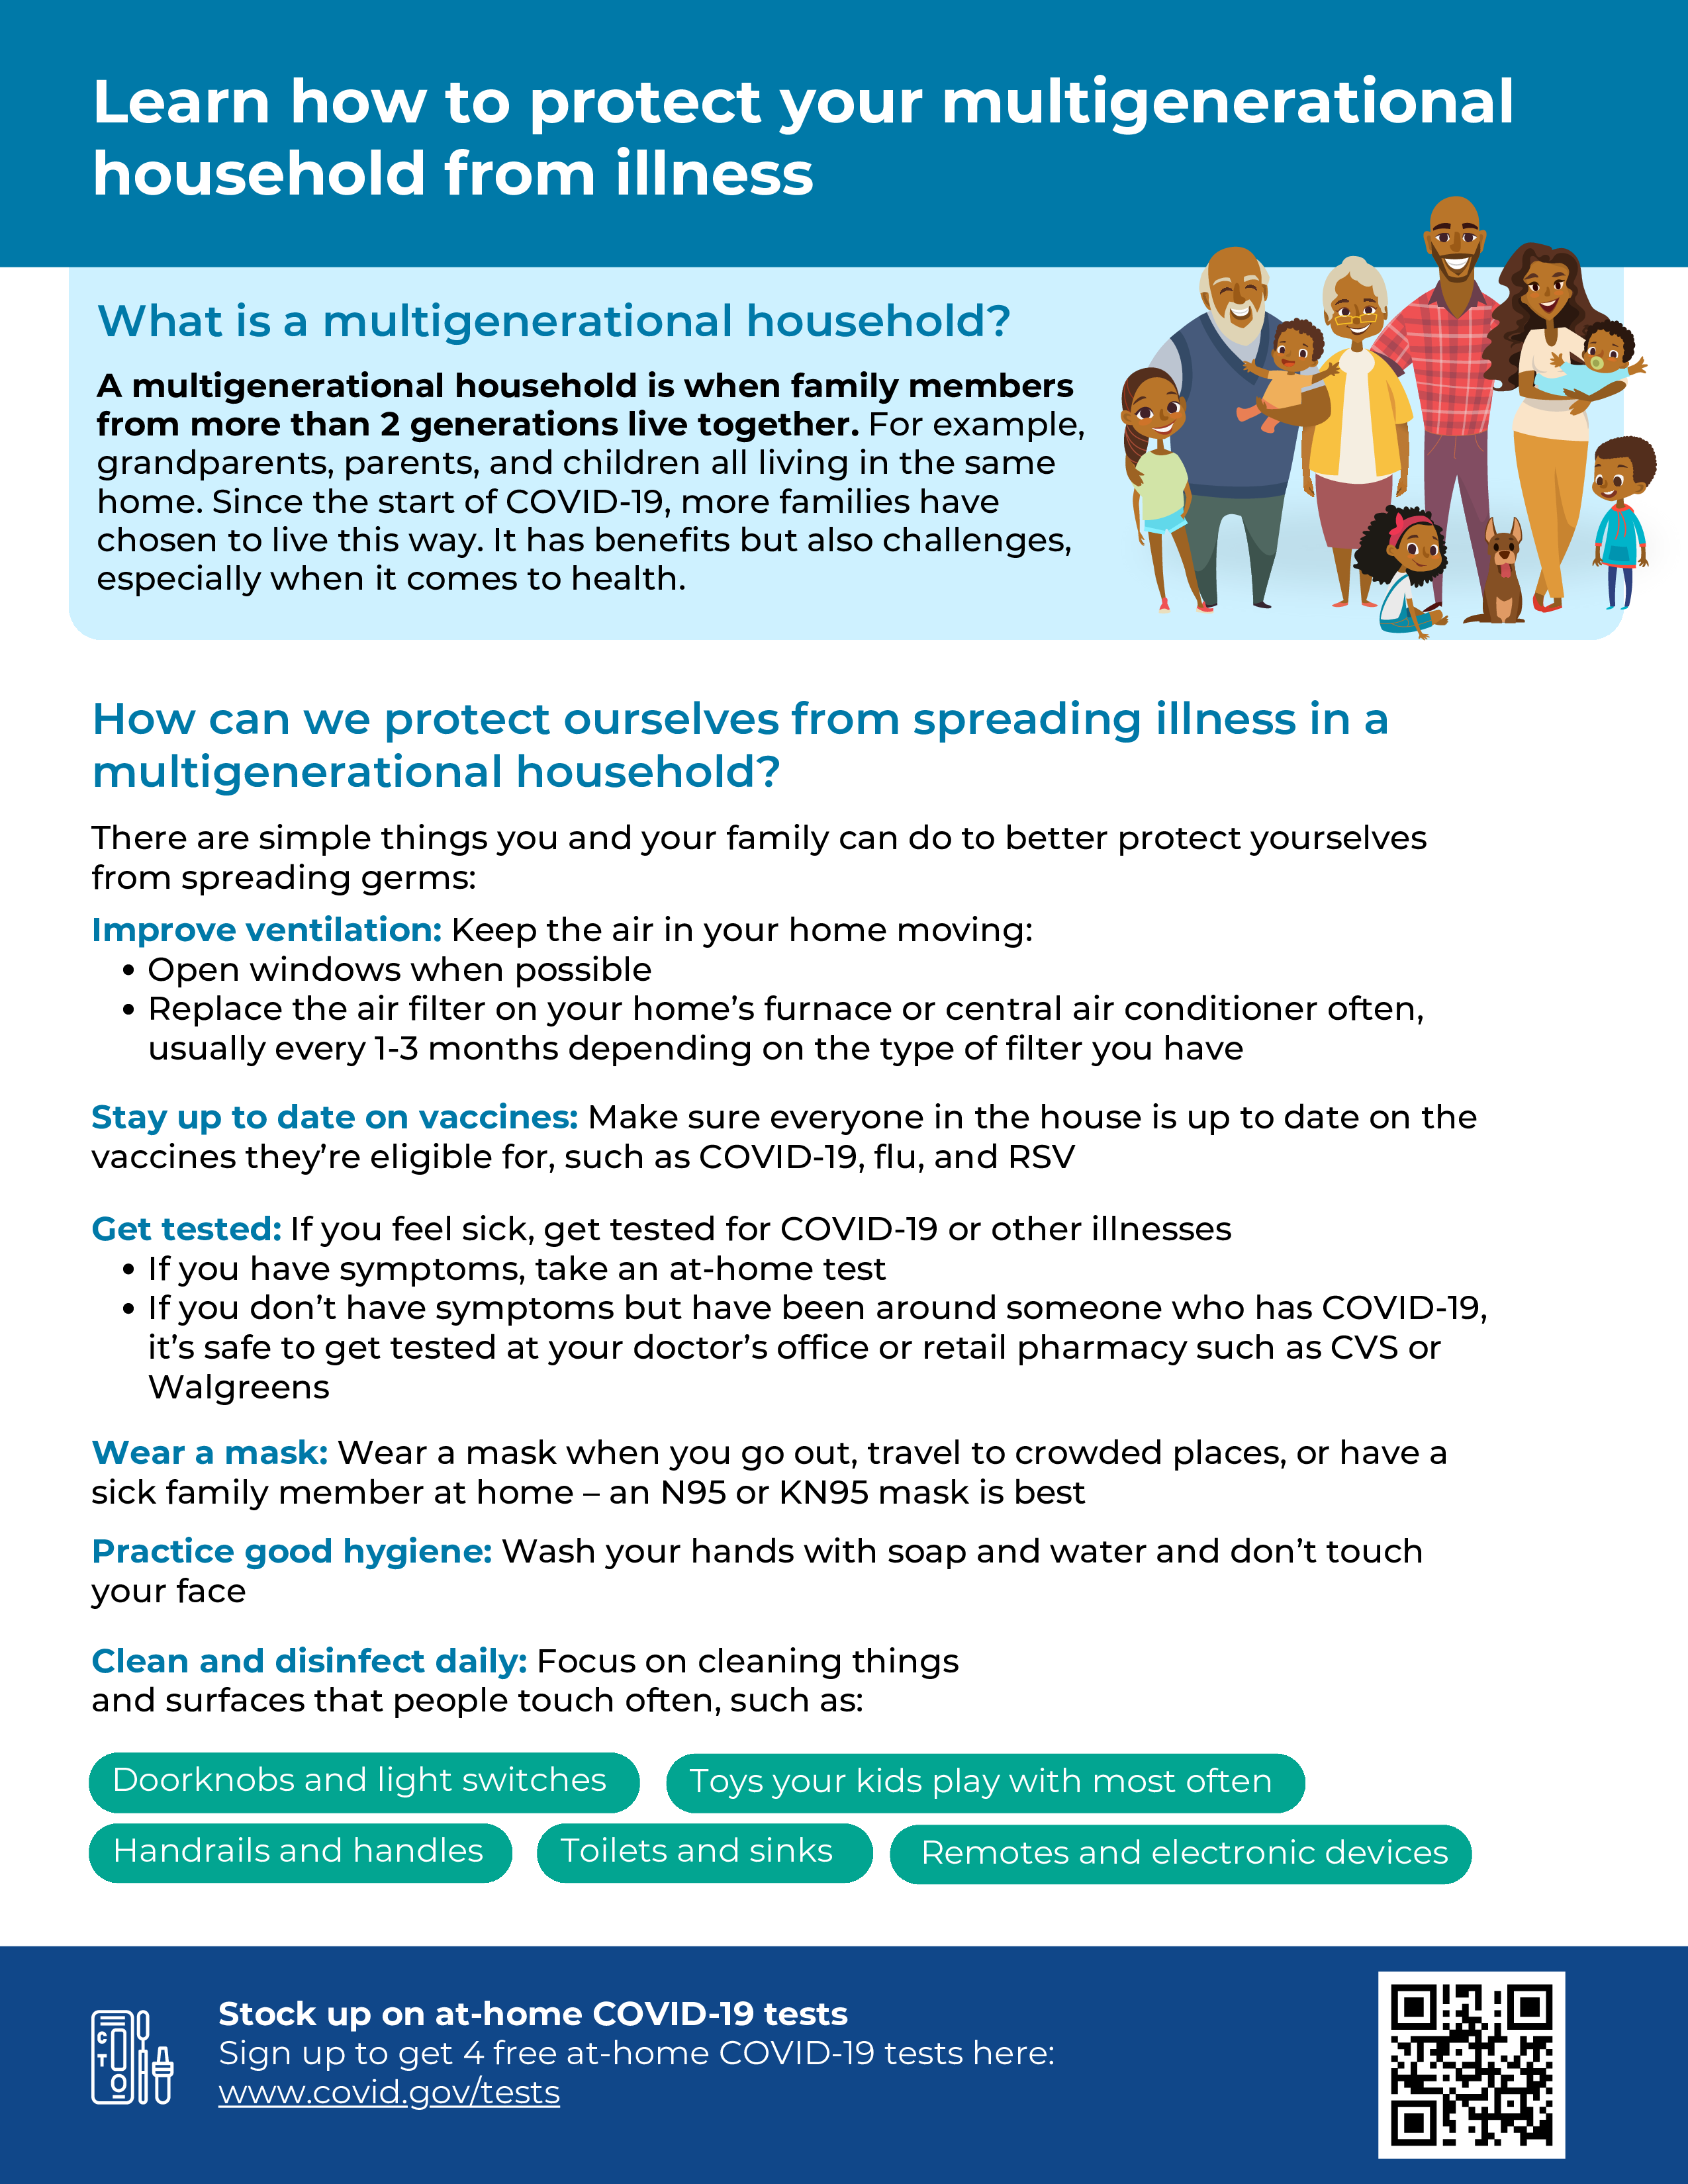 Factsheet shows a cartoon image of a multigenerational Black family, with every age from grandparents to babies represented.